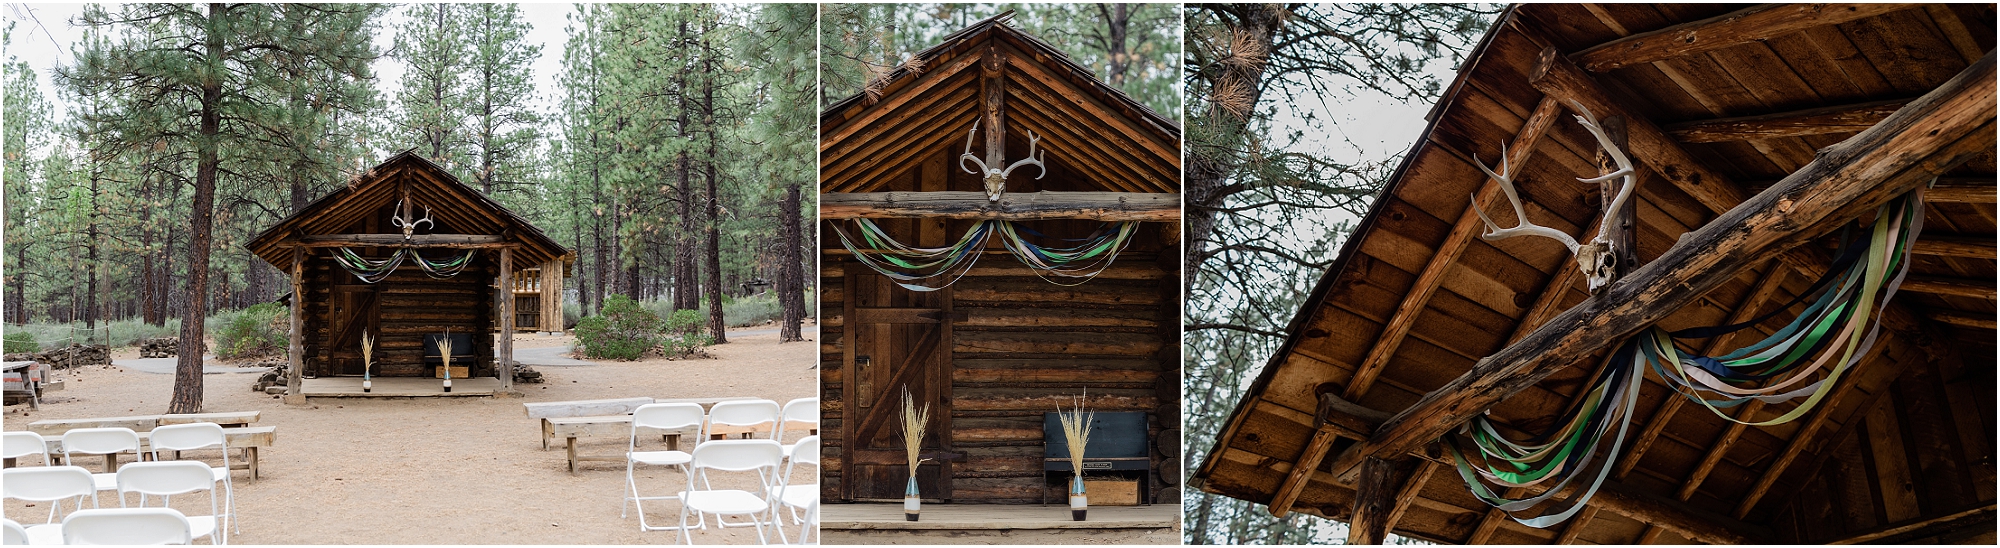 The gorgeous High Desert Museum homestead makes a beautiful ceremony location for this rustic museum wedding venue in Bend, OR. | Erica Swantek Photography